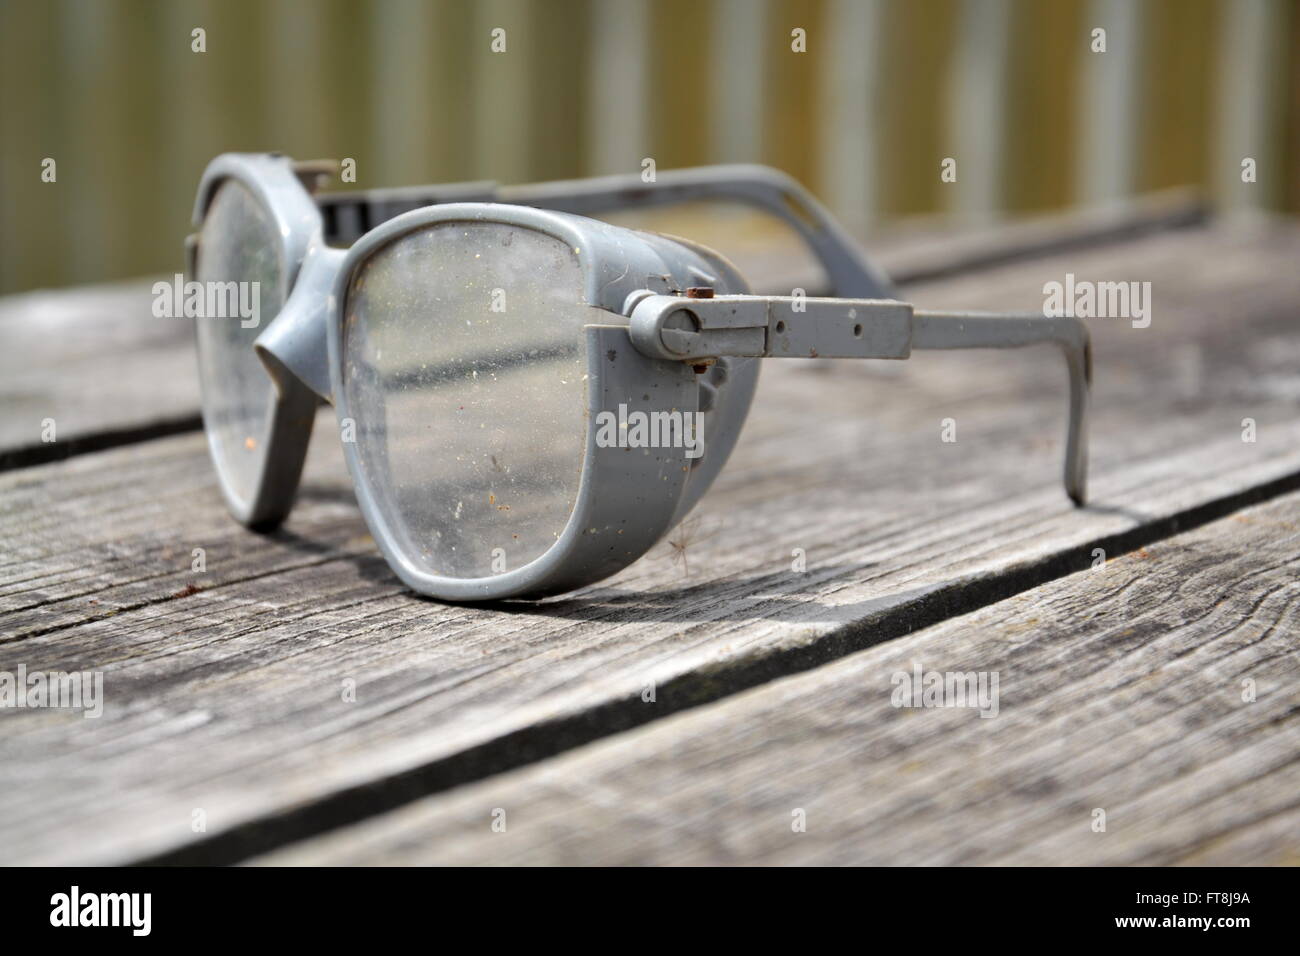 Grey vintage safety glasses on a wooden table Stock Photo